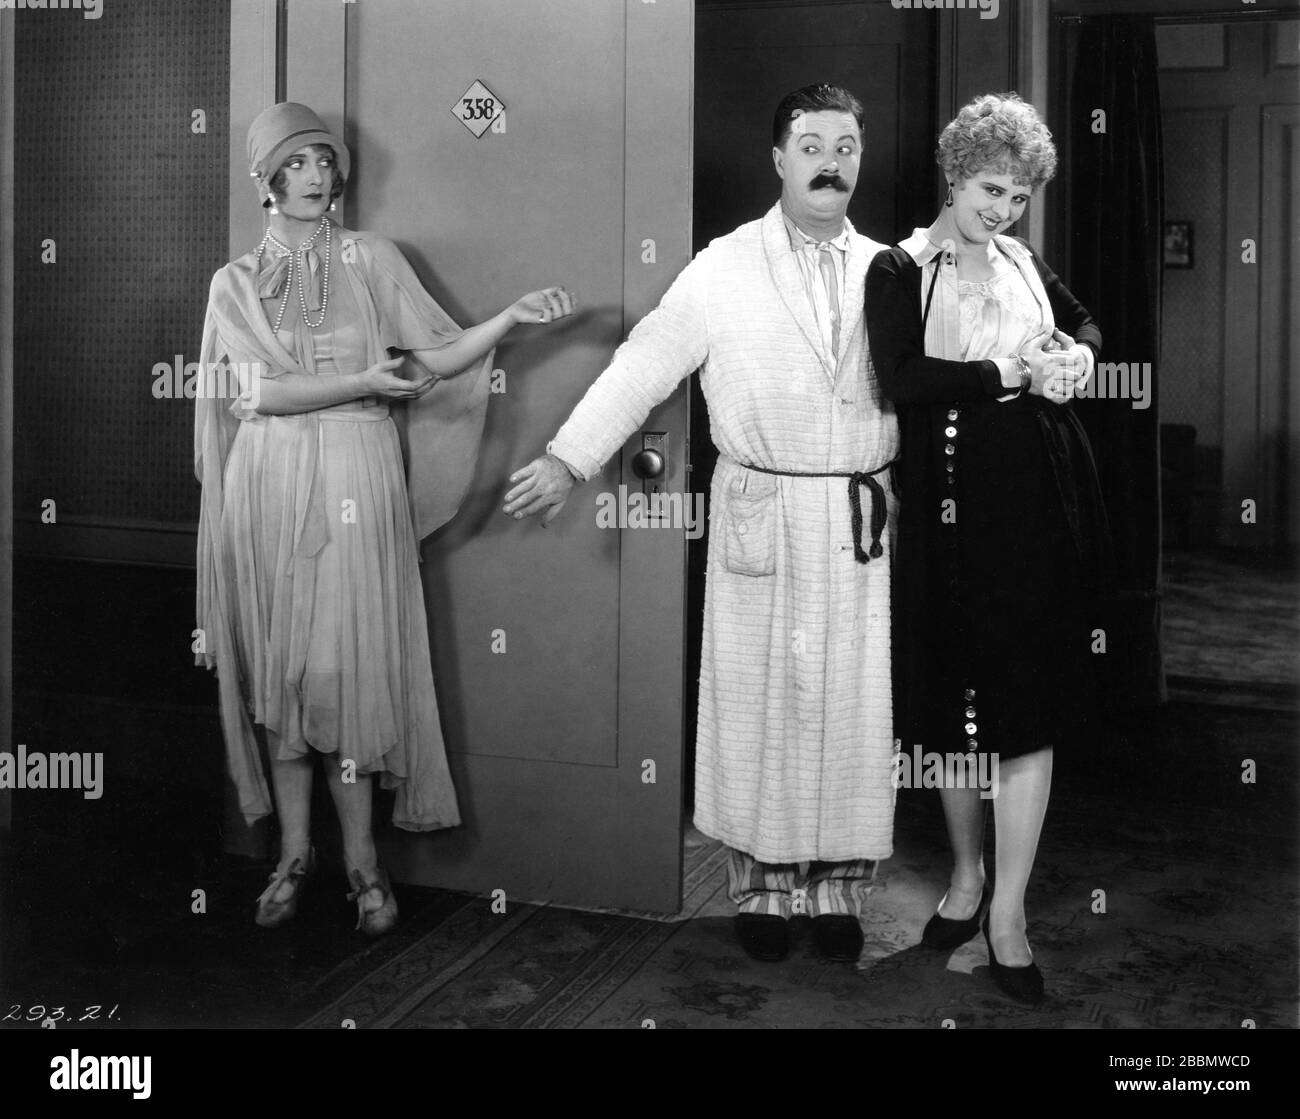 CAROLE LOMBARD BILLY BEVAN and DOT FARLEY in HIS UNLUCKY NIGHT 1928 director HARRY EDWARDS Silent Comedy Short Mack Sennett Comedies / Pathe Exchange Stock Photo